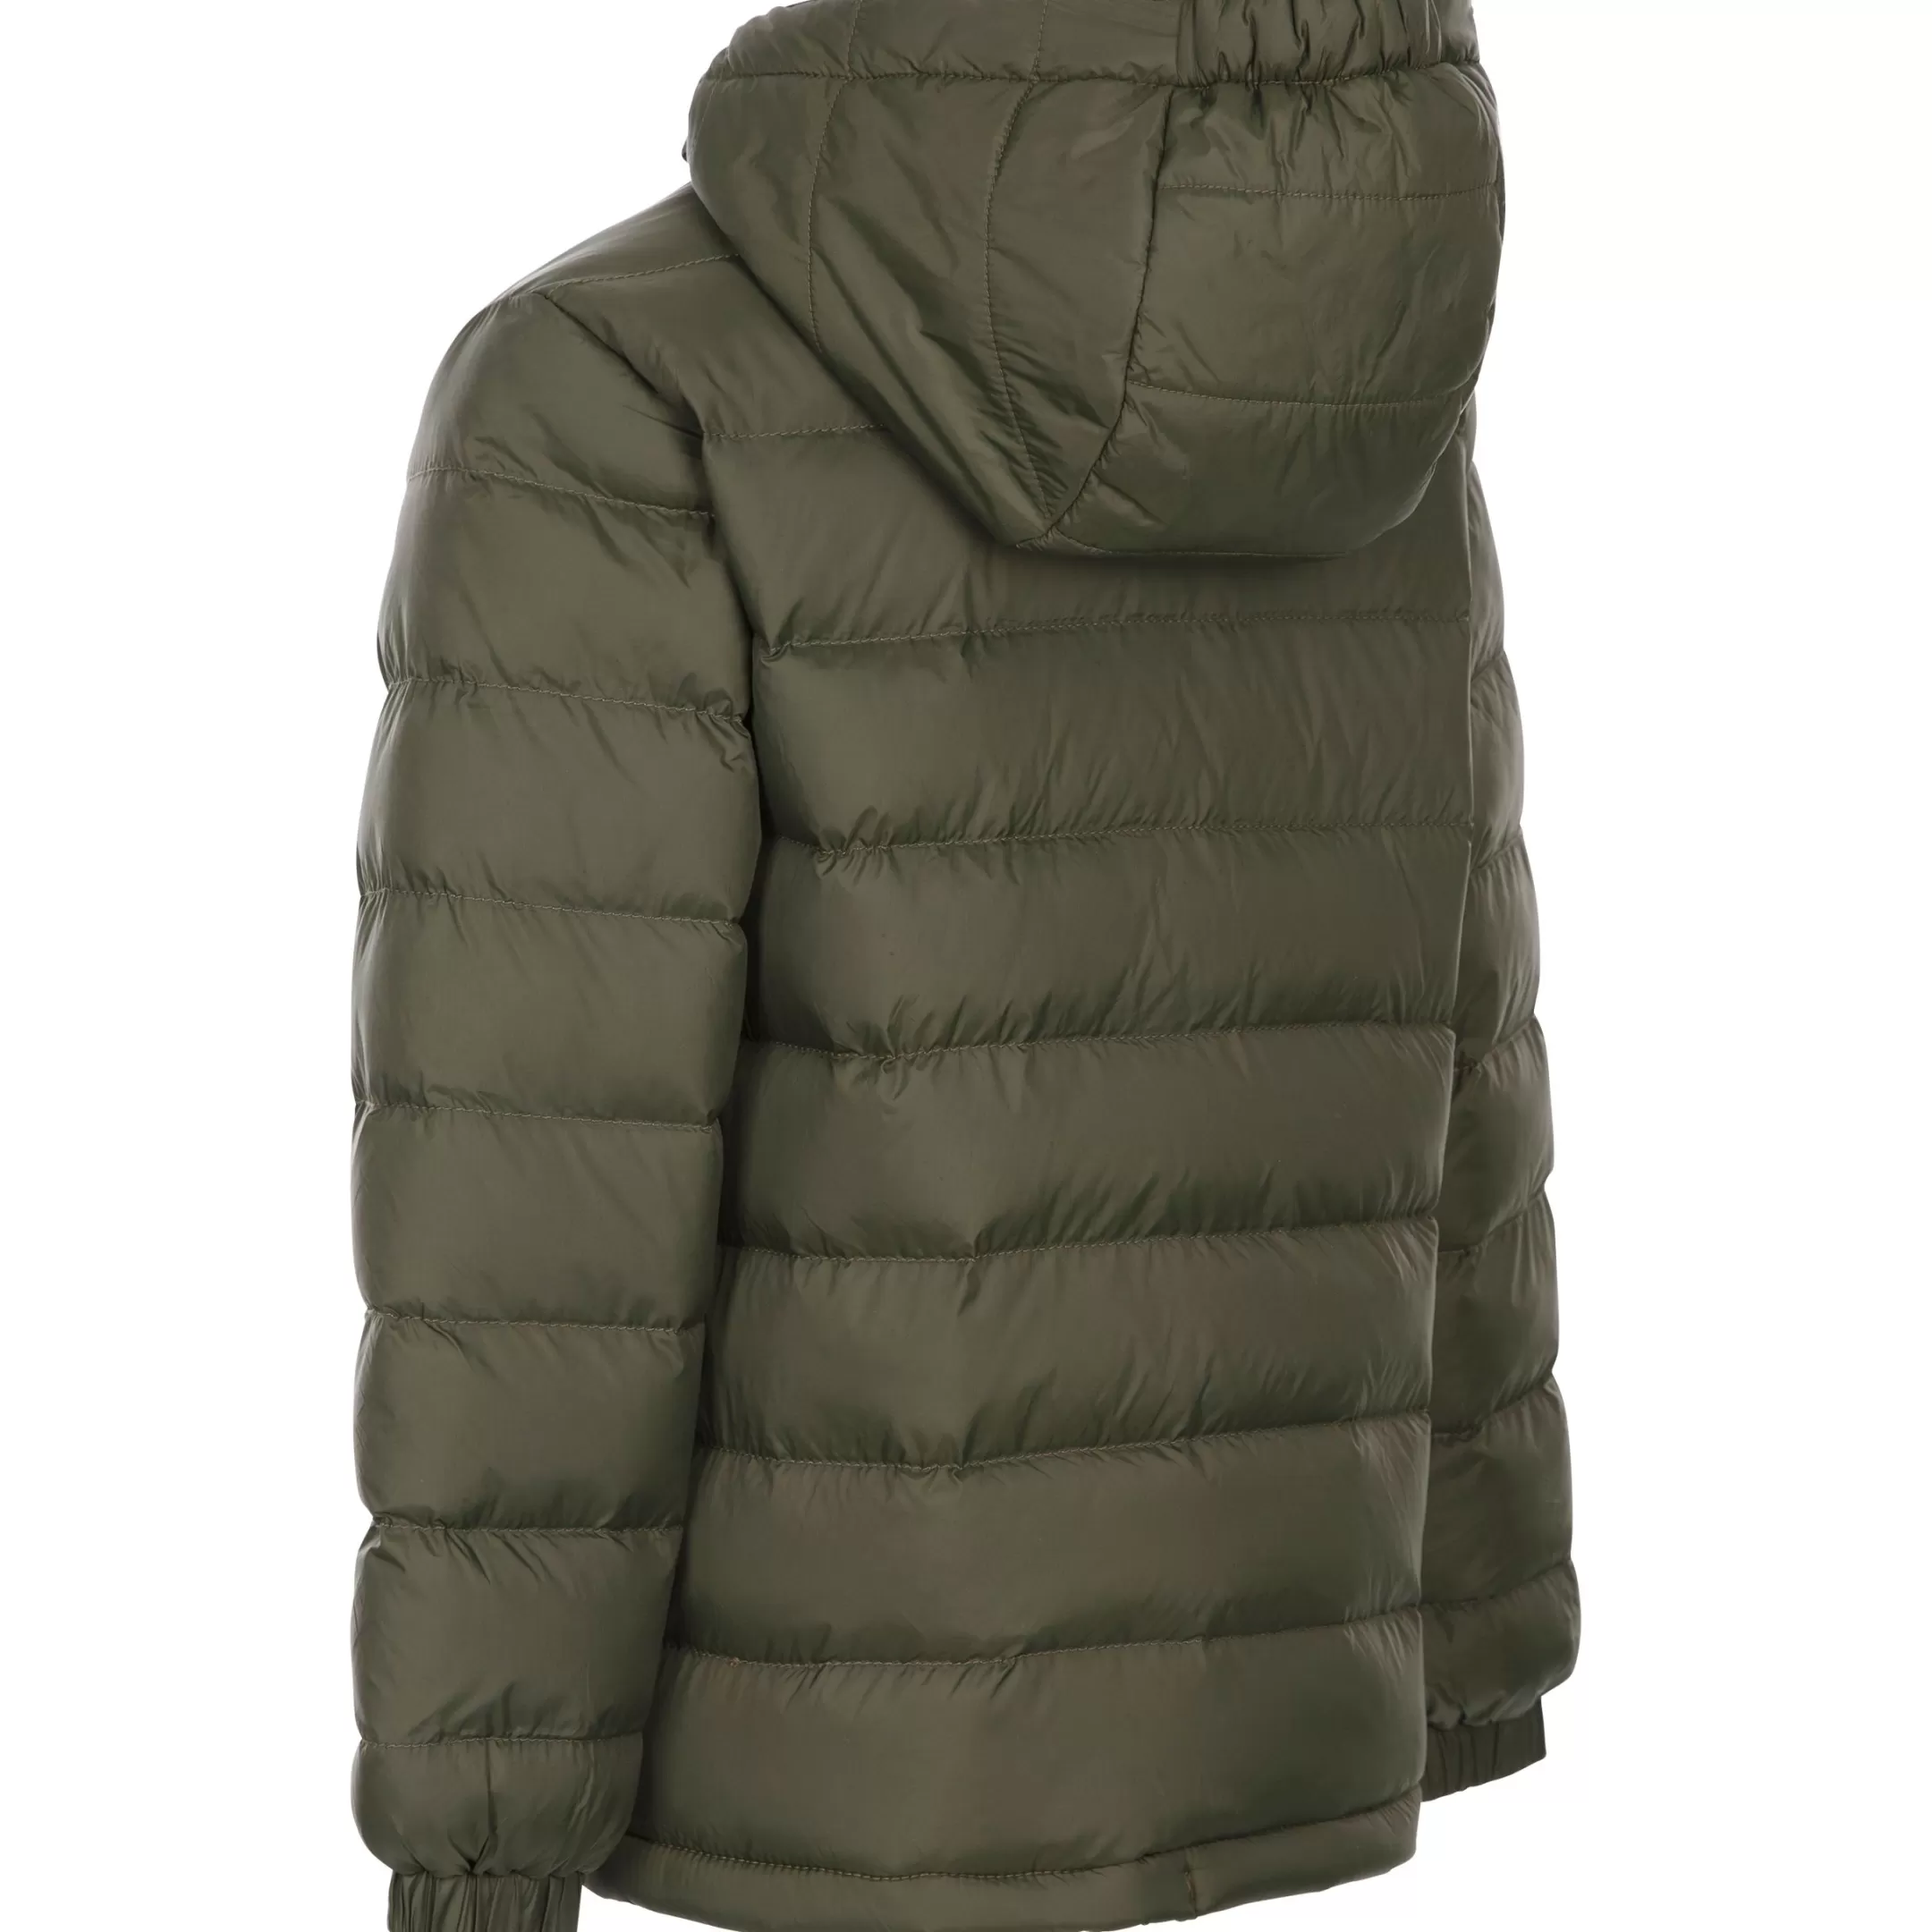 Kids' Padded Casual Jacket Aksel | Trespass Hot